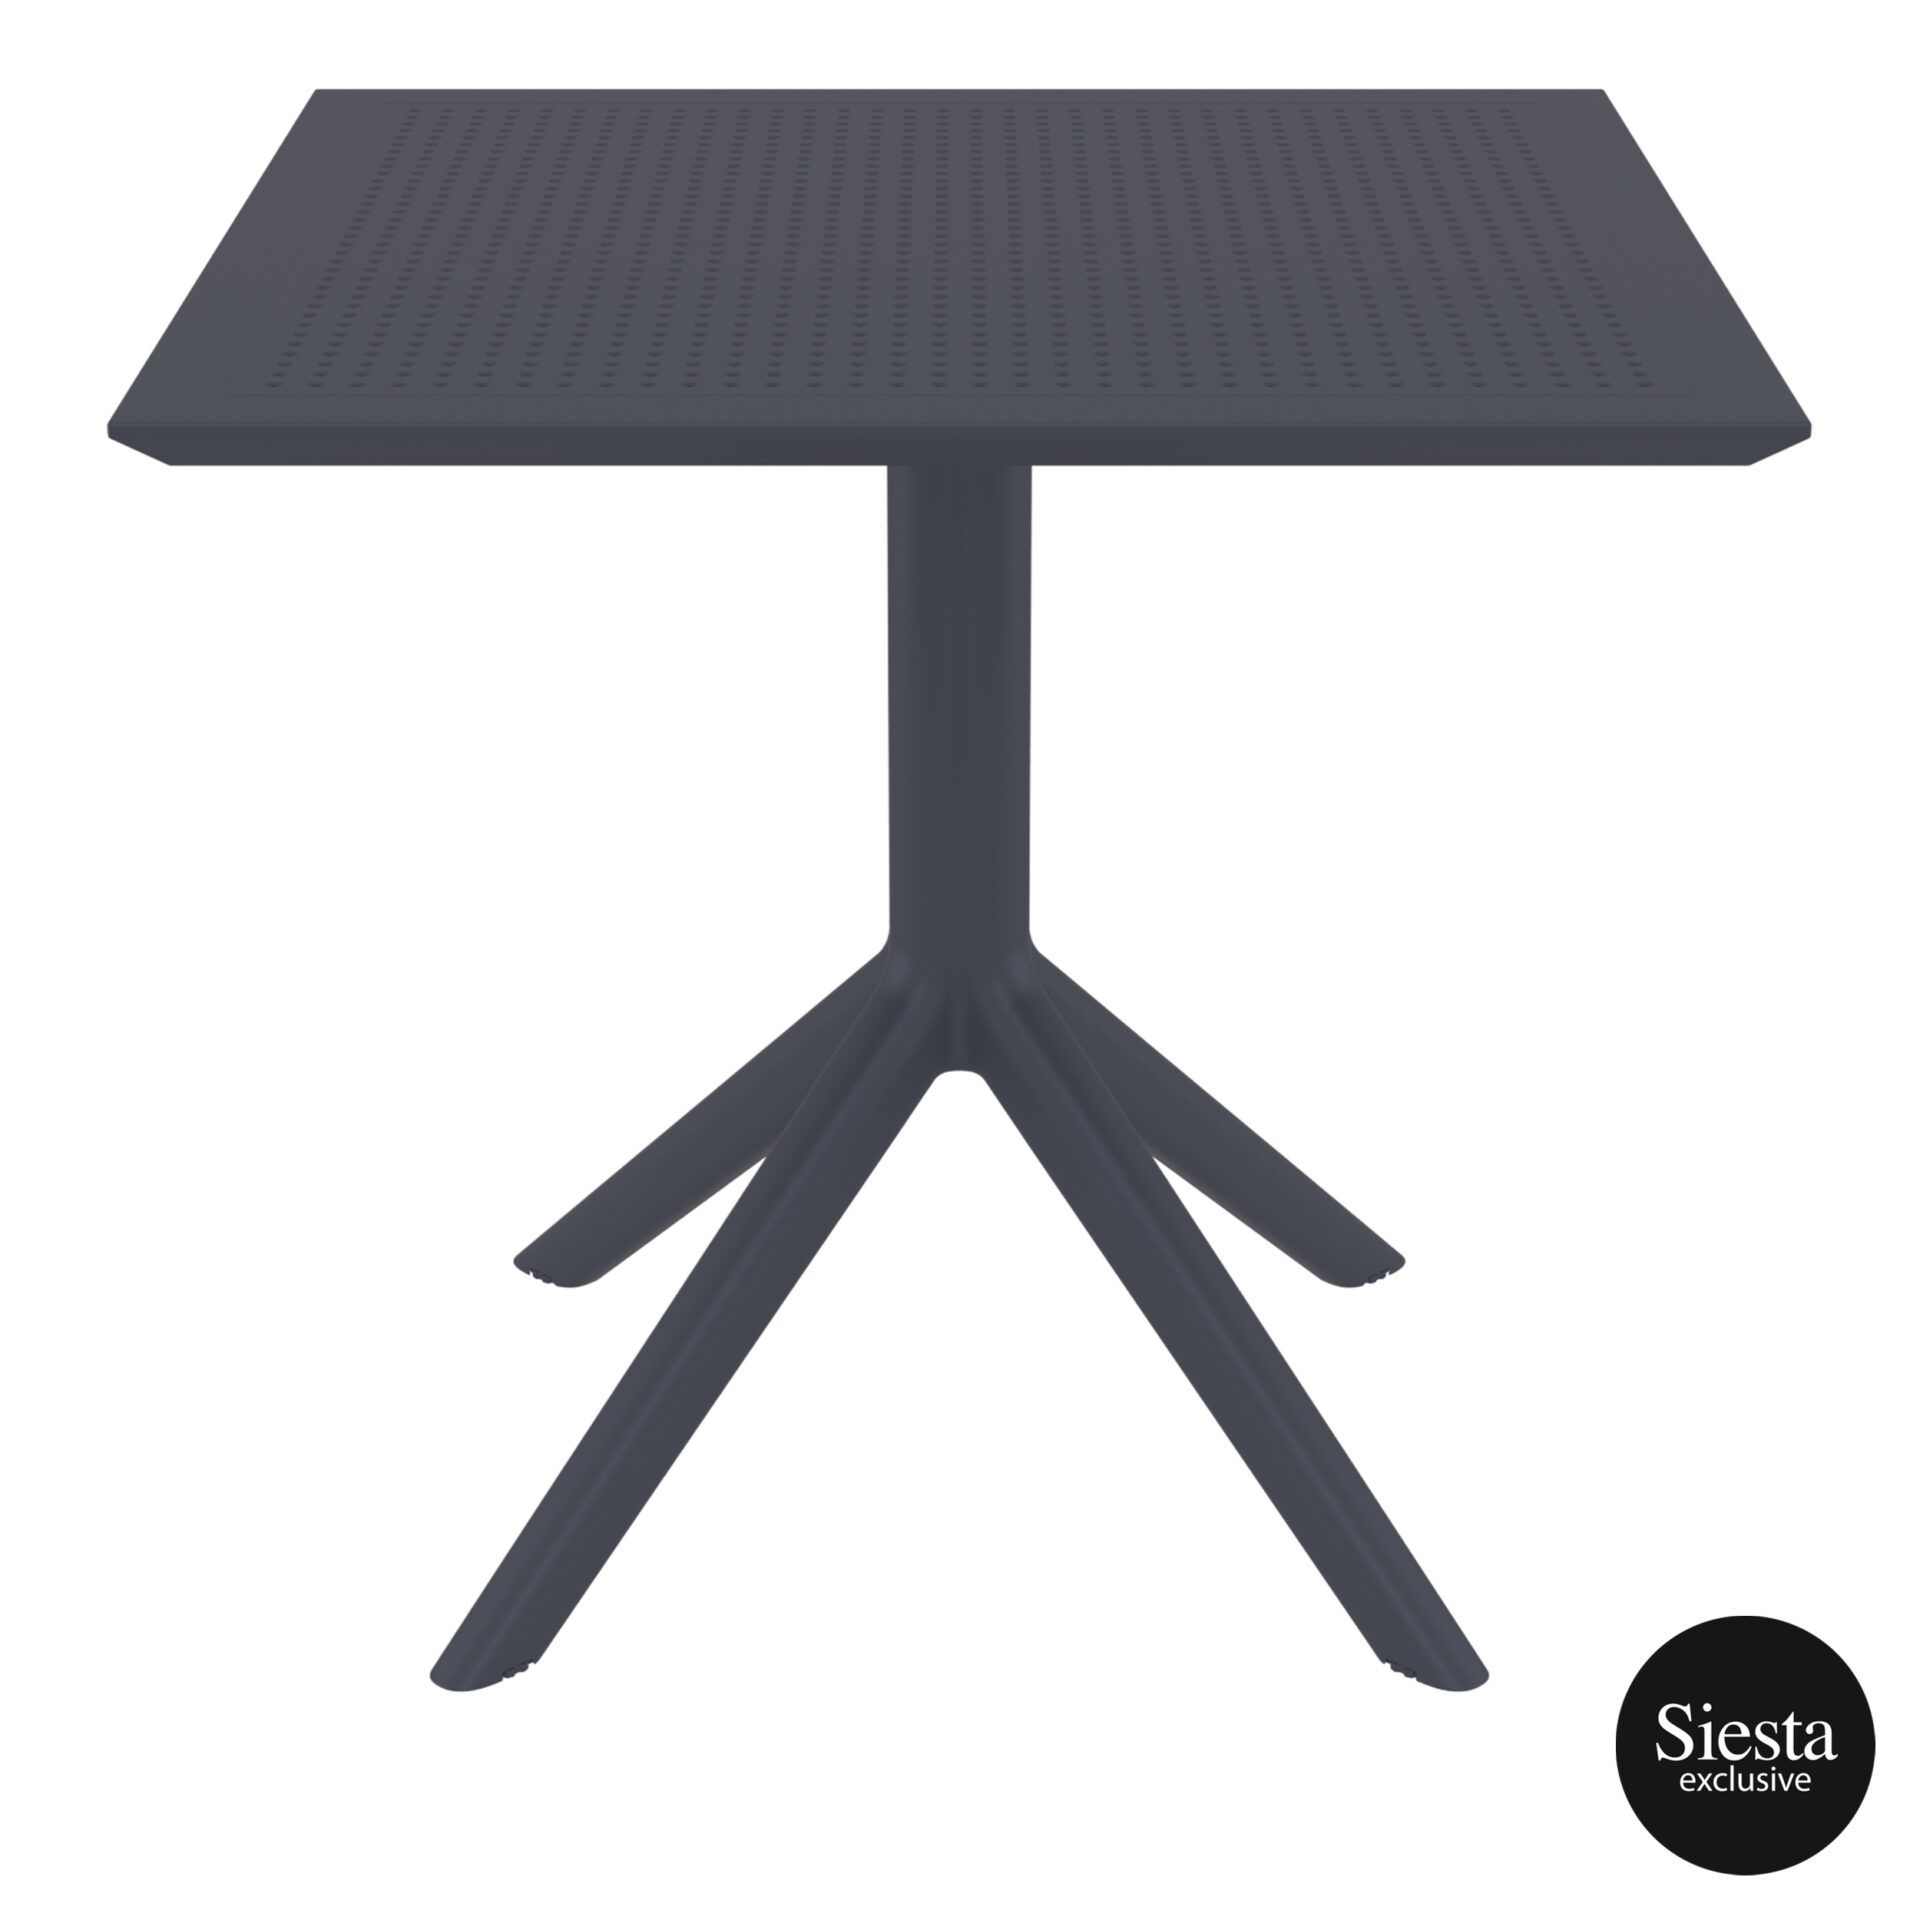 Sky Table 80 - Anthracite